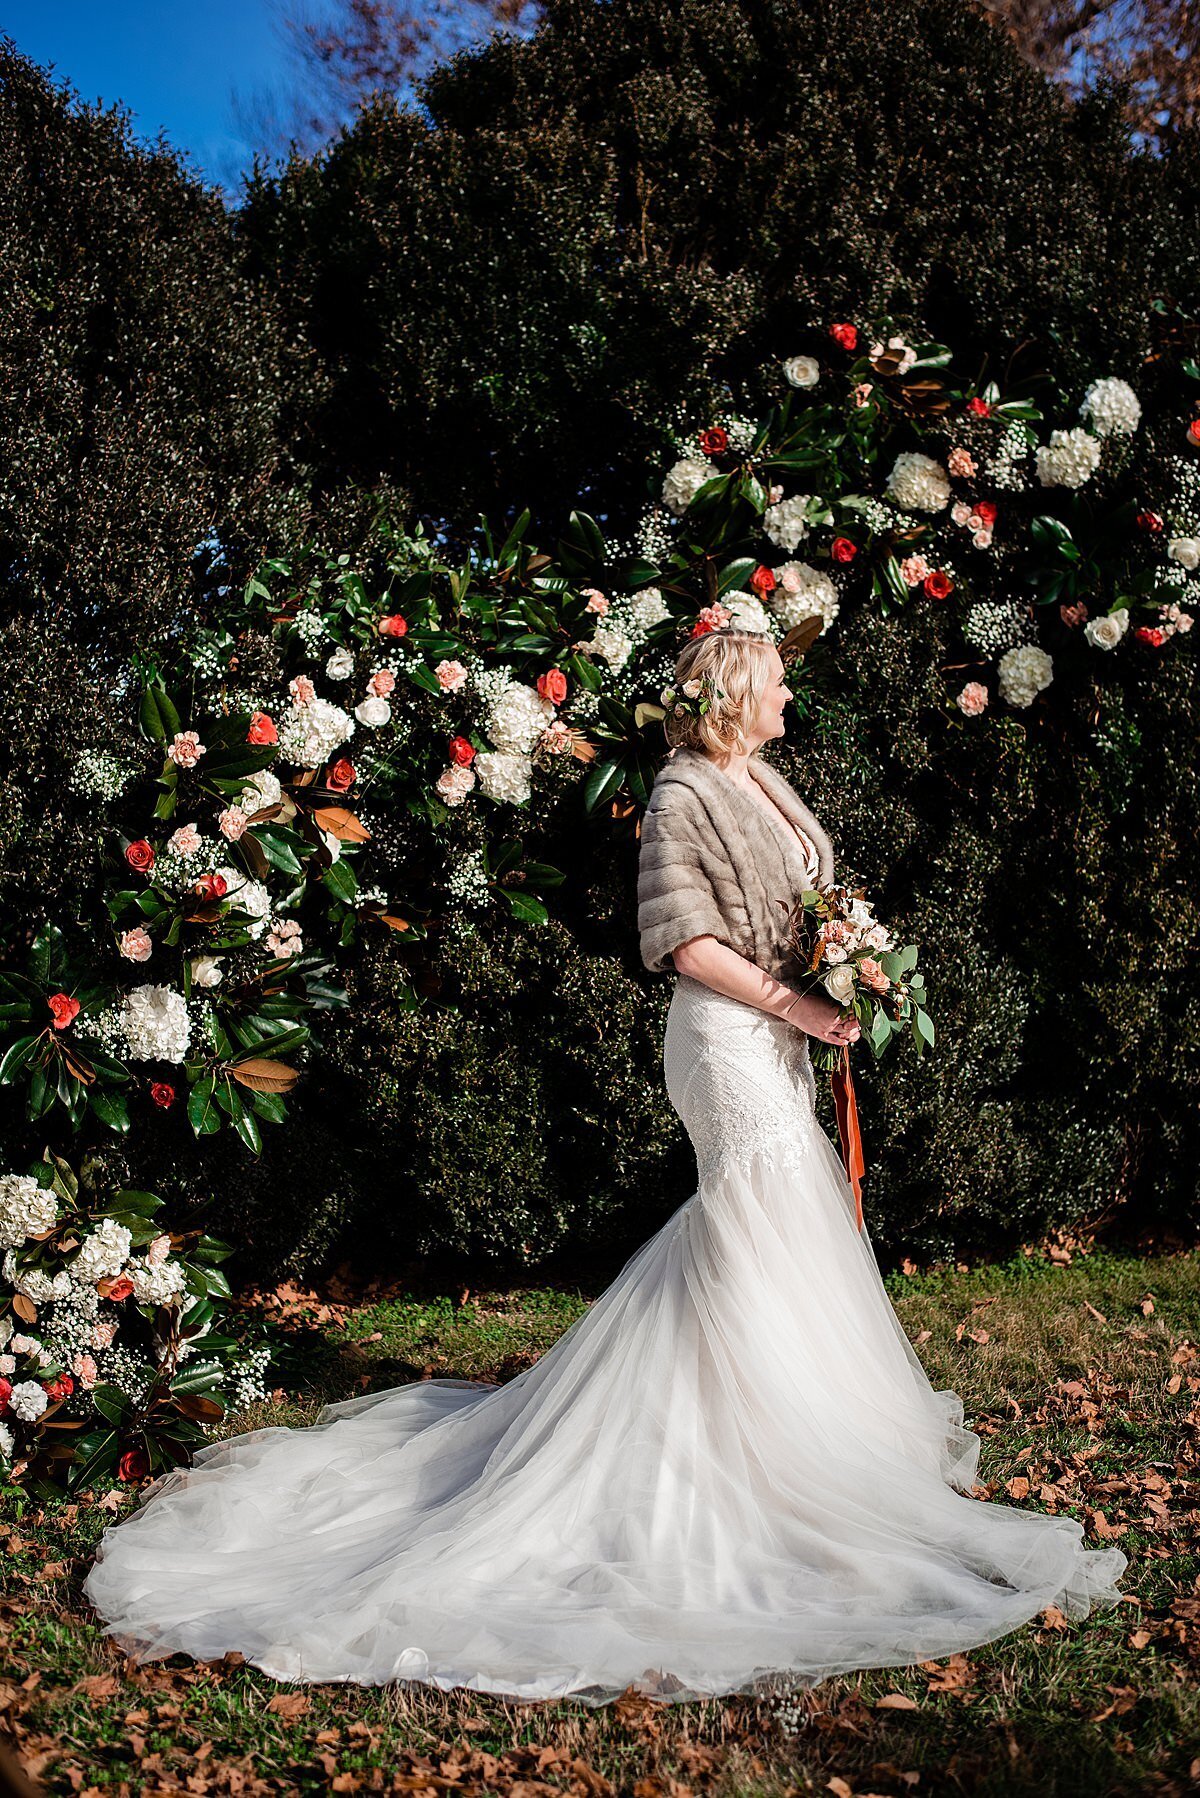 A bride in a light brown fur wrap with a flowing organza wedding dress with a fill train stands in front of a large floral installation of white hydrangea, magnolia leaves, blush roses and orange roses is a large boxwood hedge at Rippa Villa. The bride is holding a bouquet of blush and white flowers wrapped in a rust colored velvet ribbon which matches the flower crown in her hair for her winter wedding.